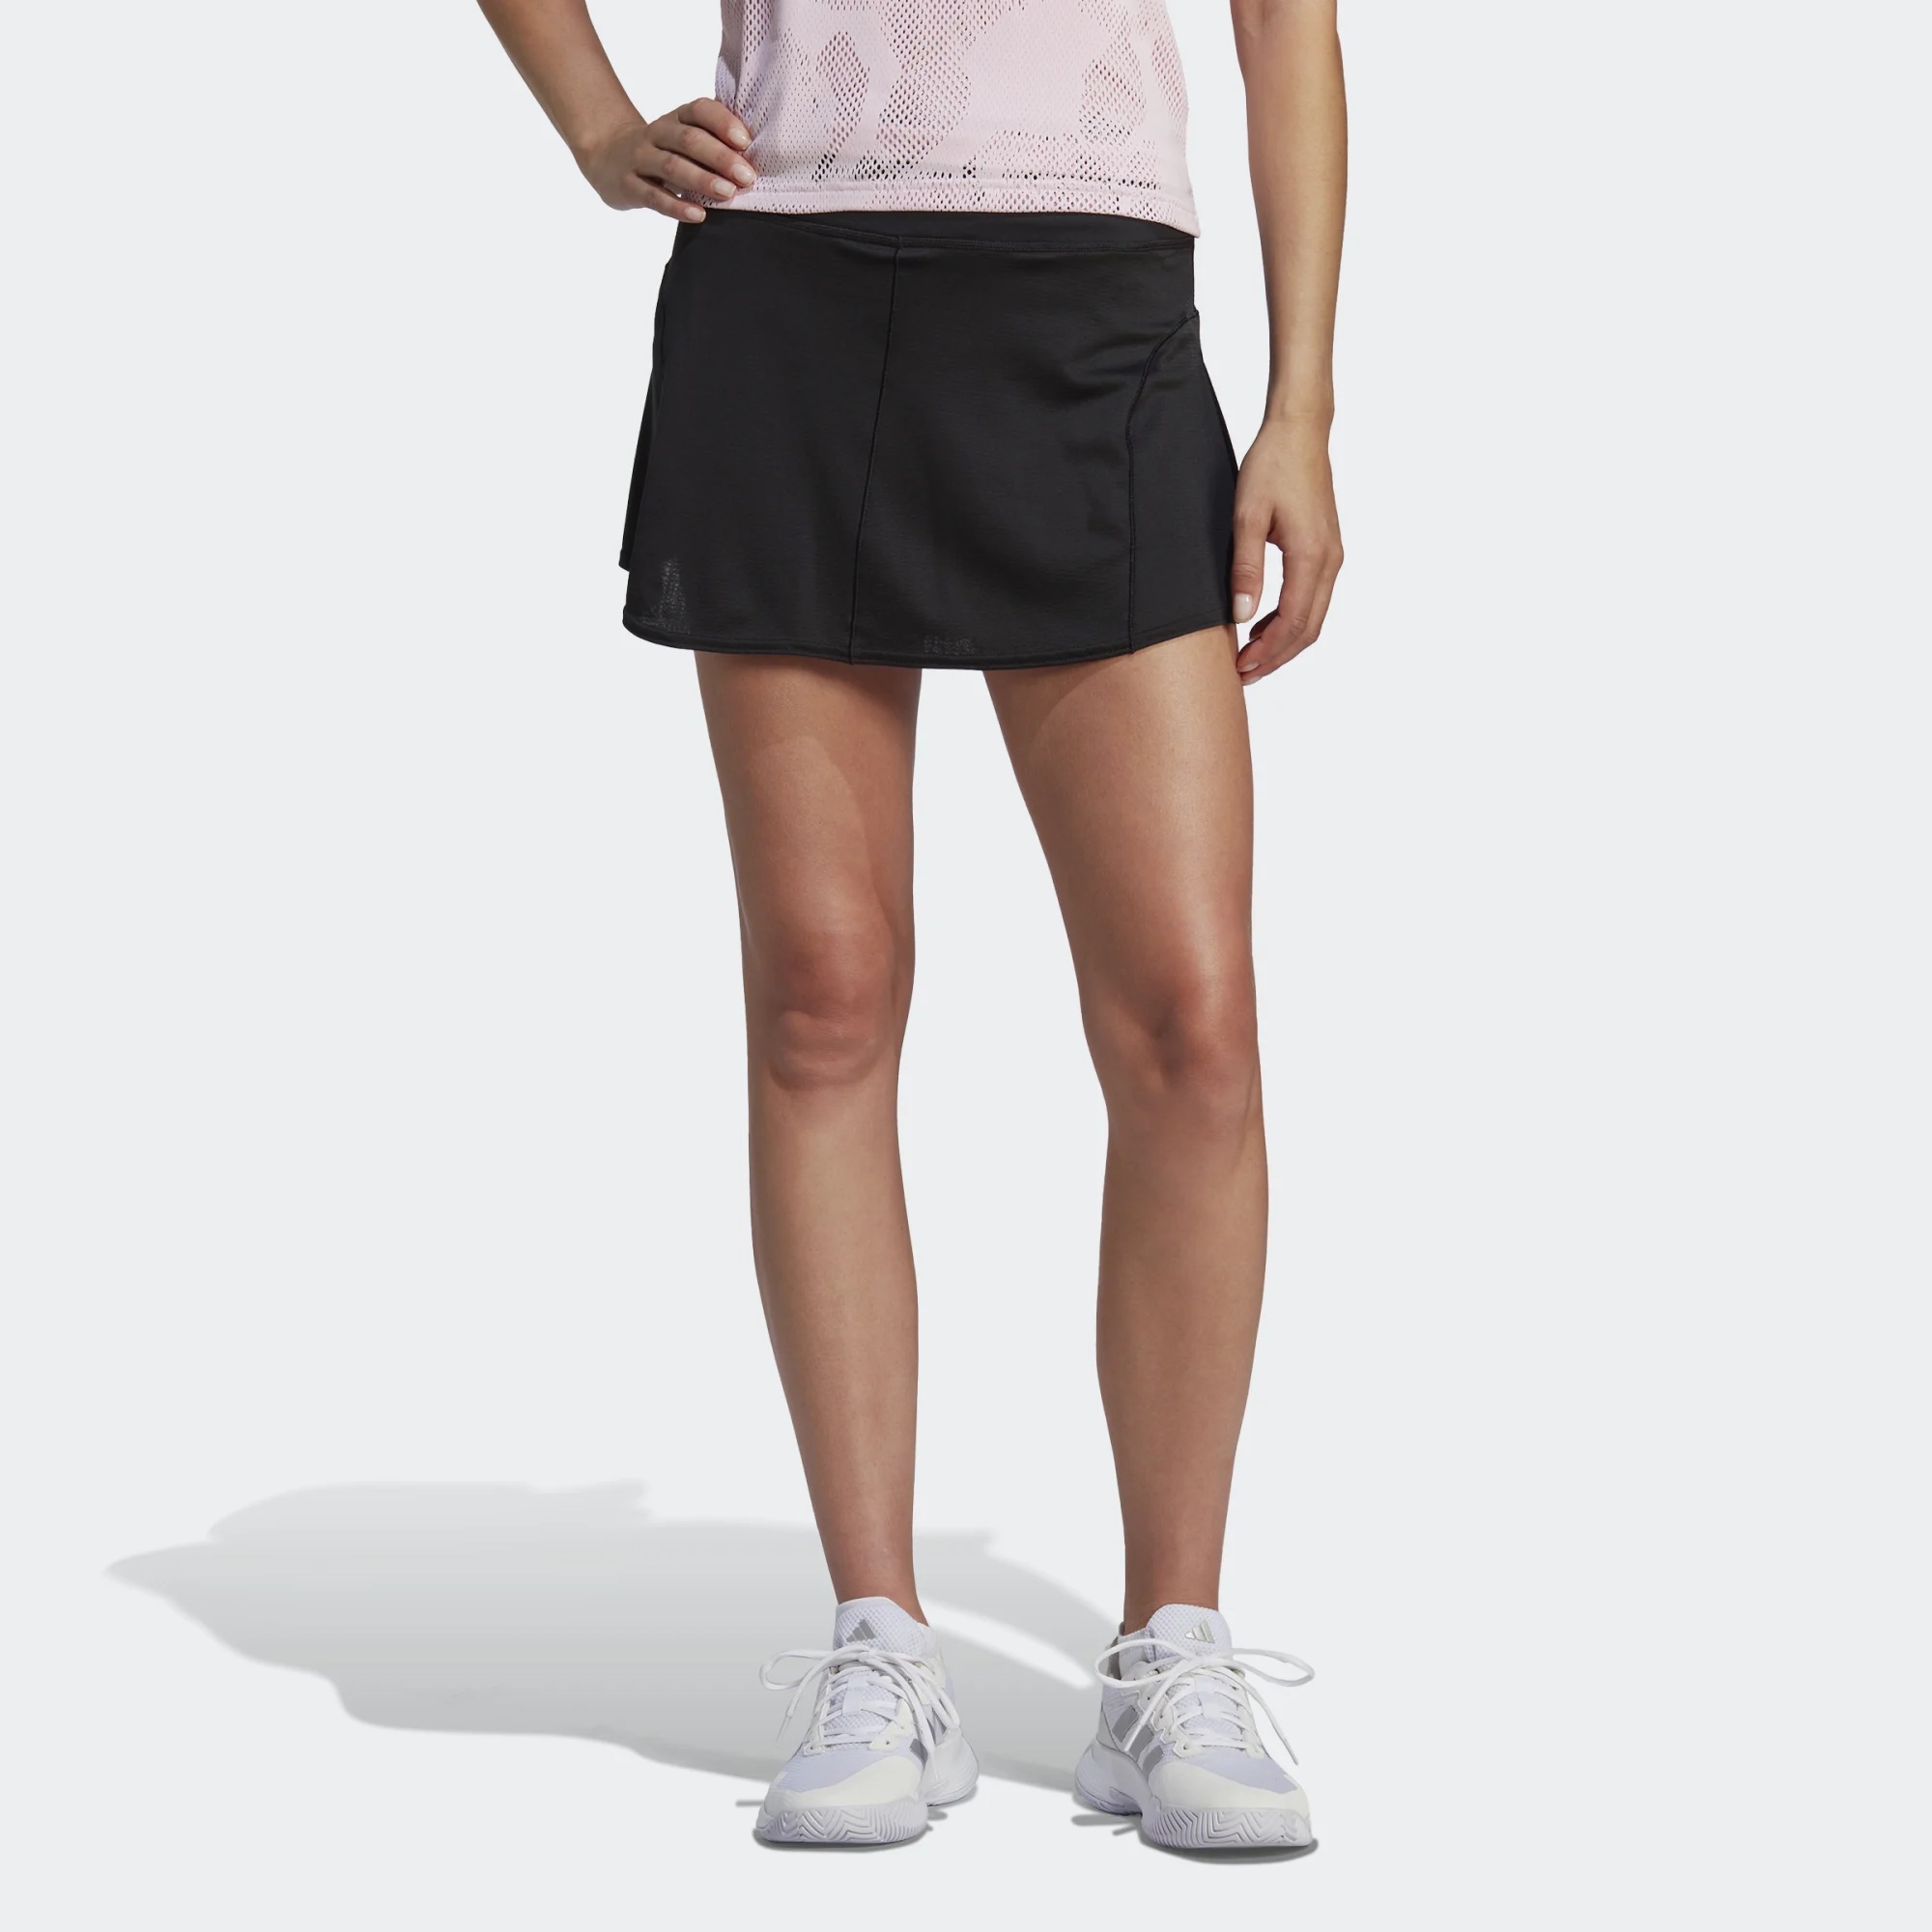 15 Best Tennis Skirts for Style & Function | Well+Good